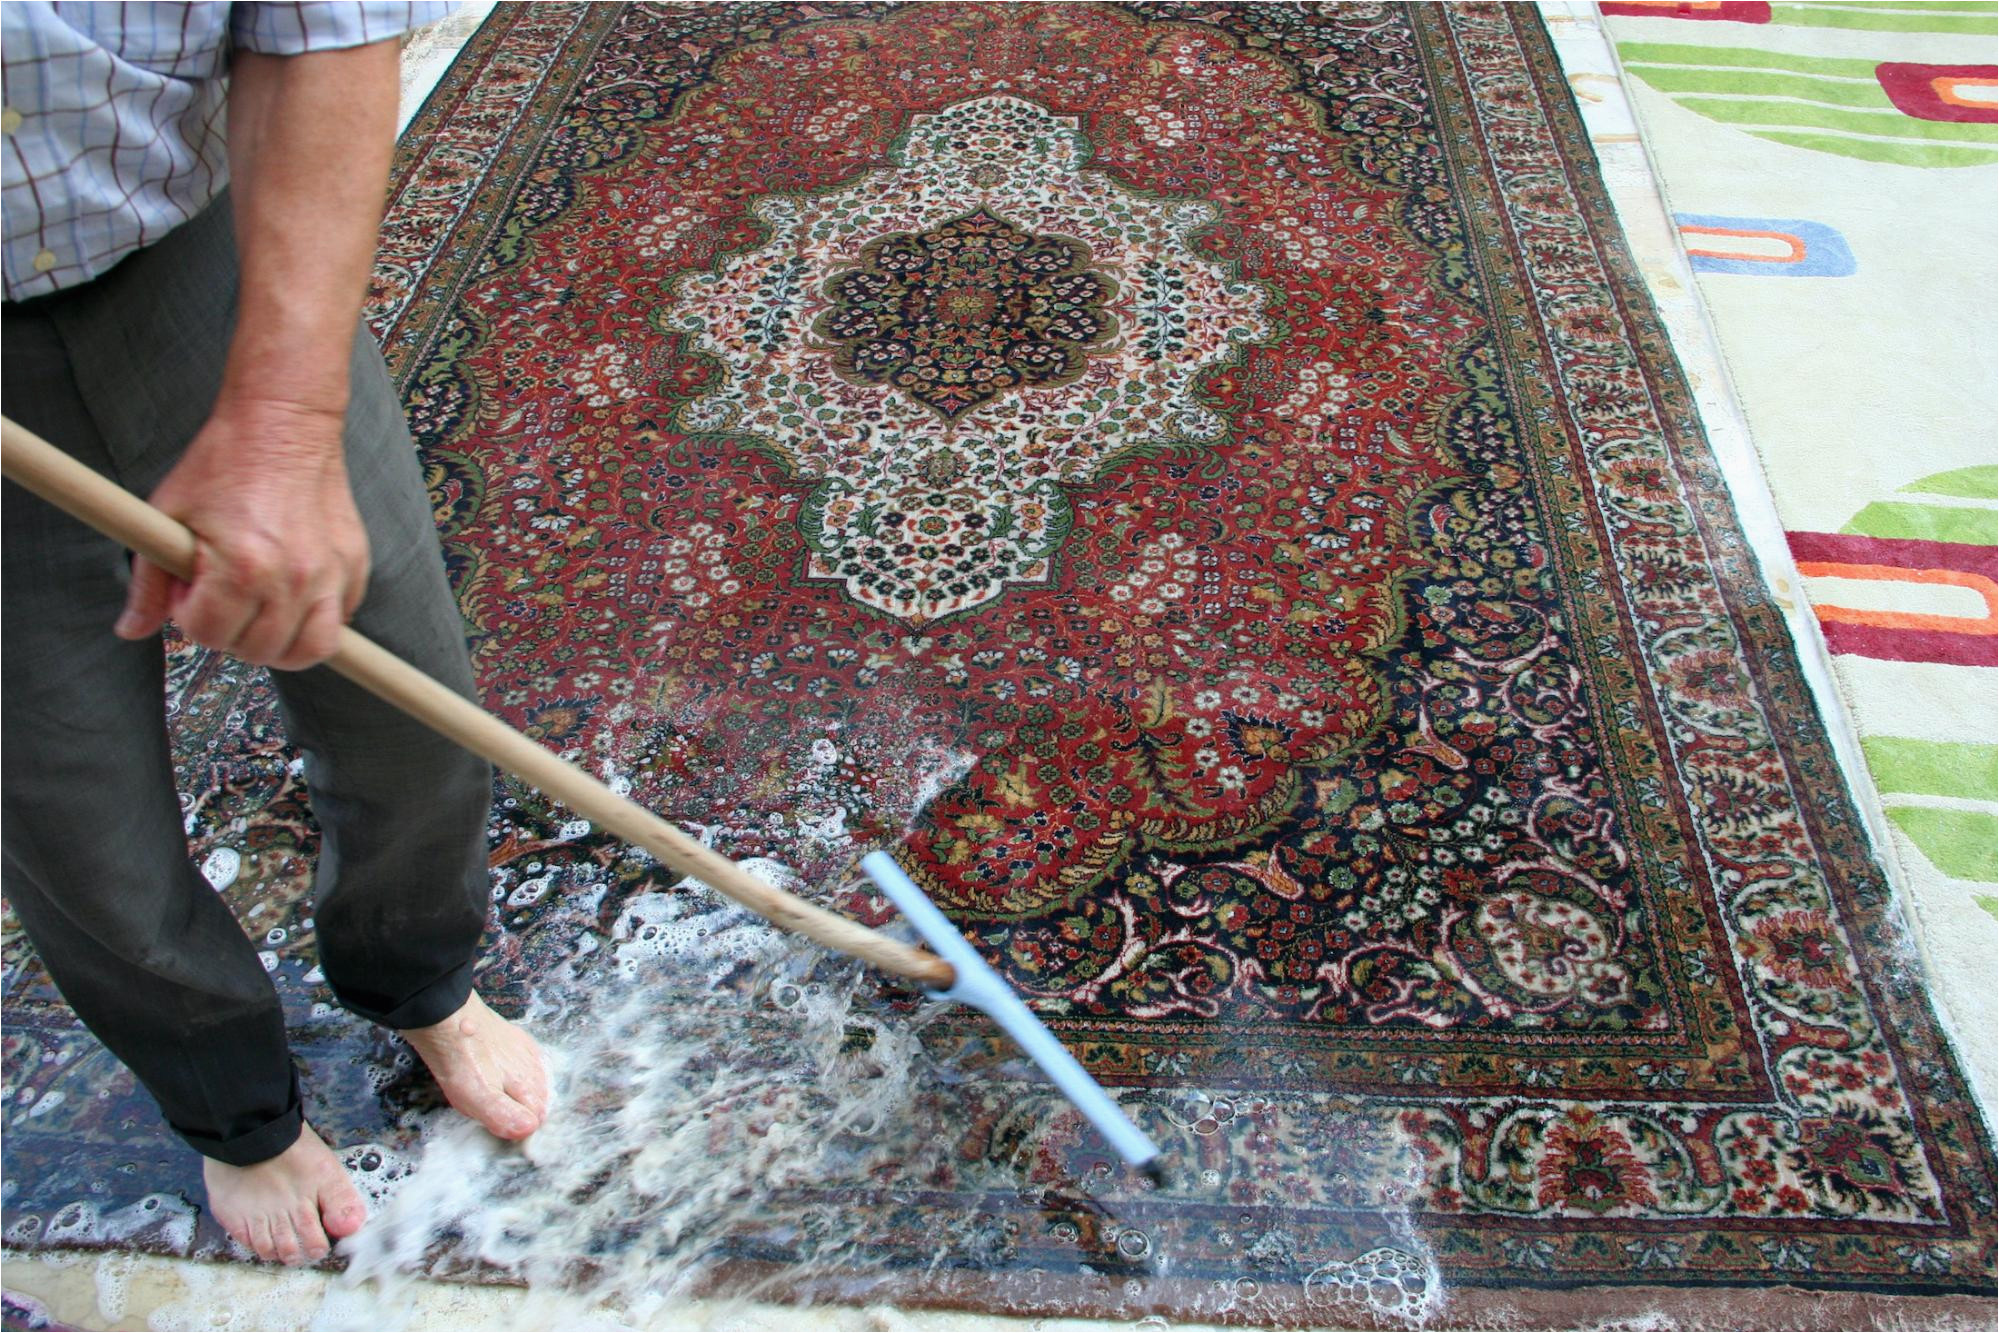 Cleaning area Rug with Hose How to Clean area Rugs 2022 Bungalow